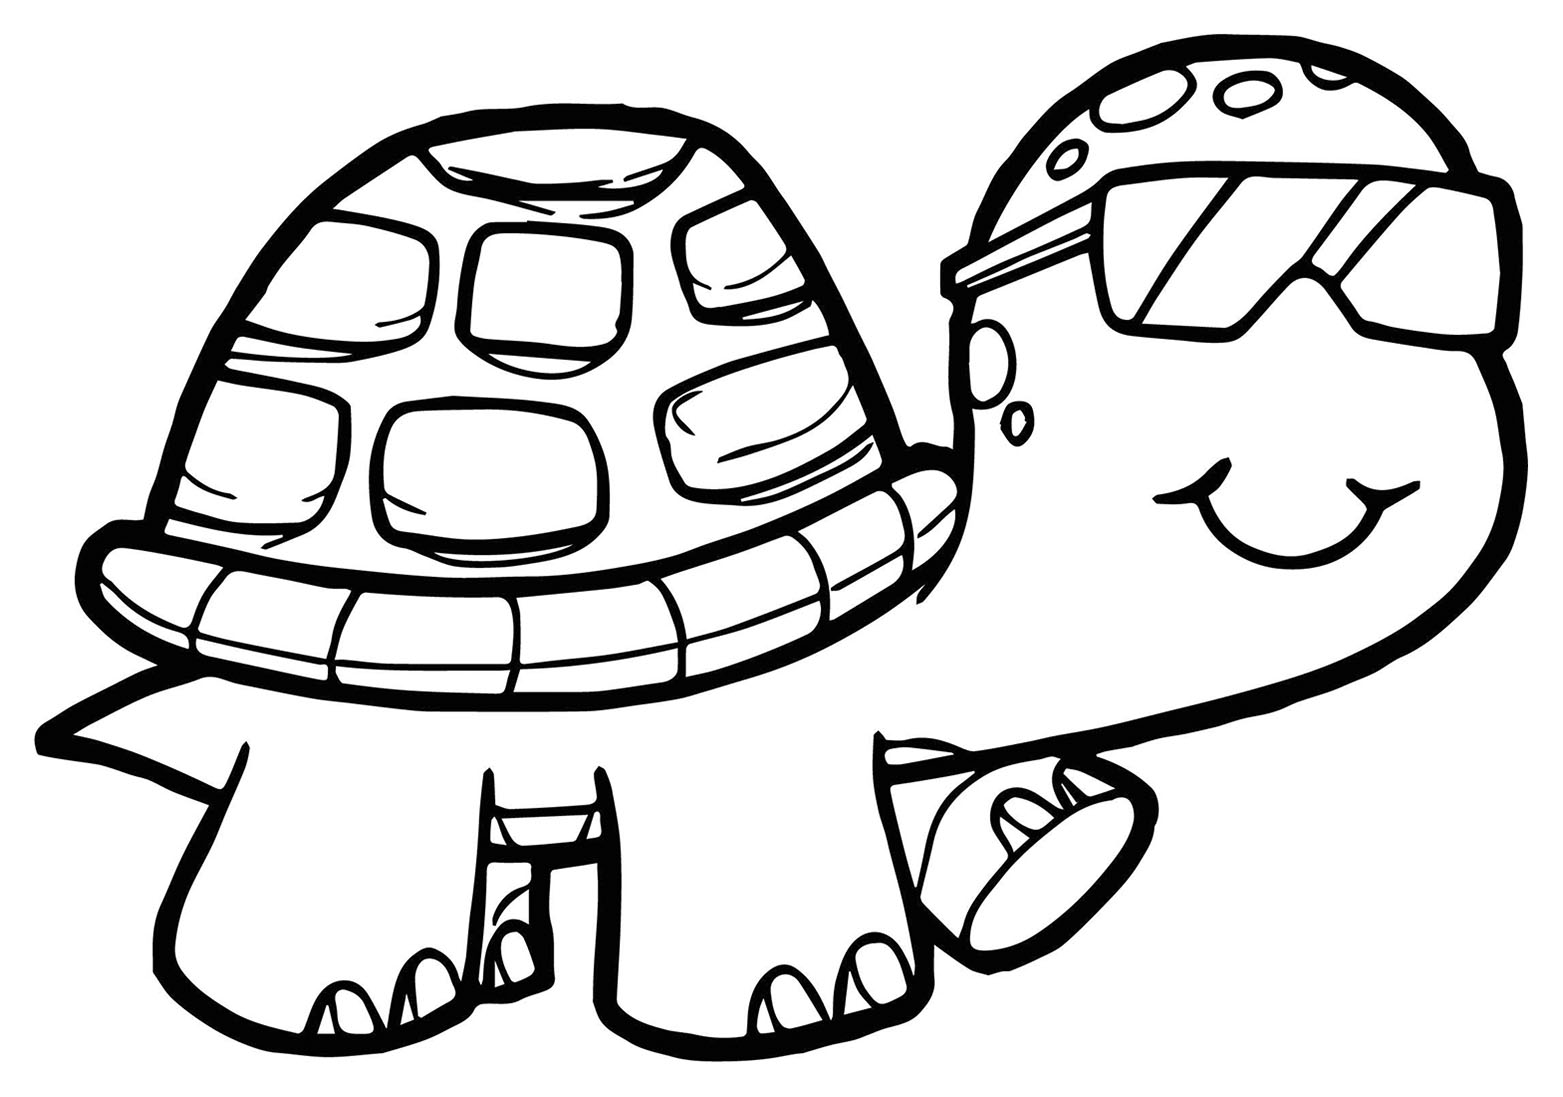 Turtle coloring pages to download - Turtles Kids Coloring Pages